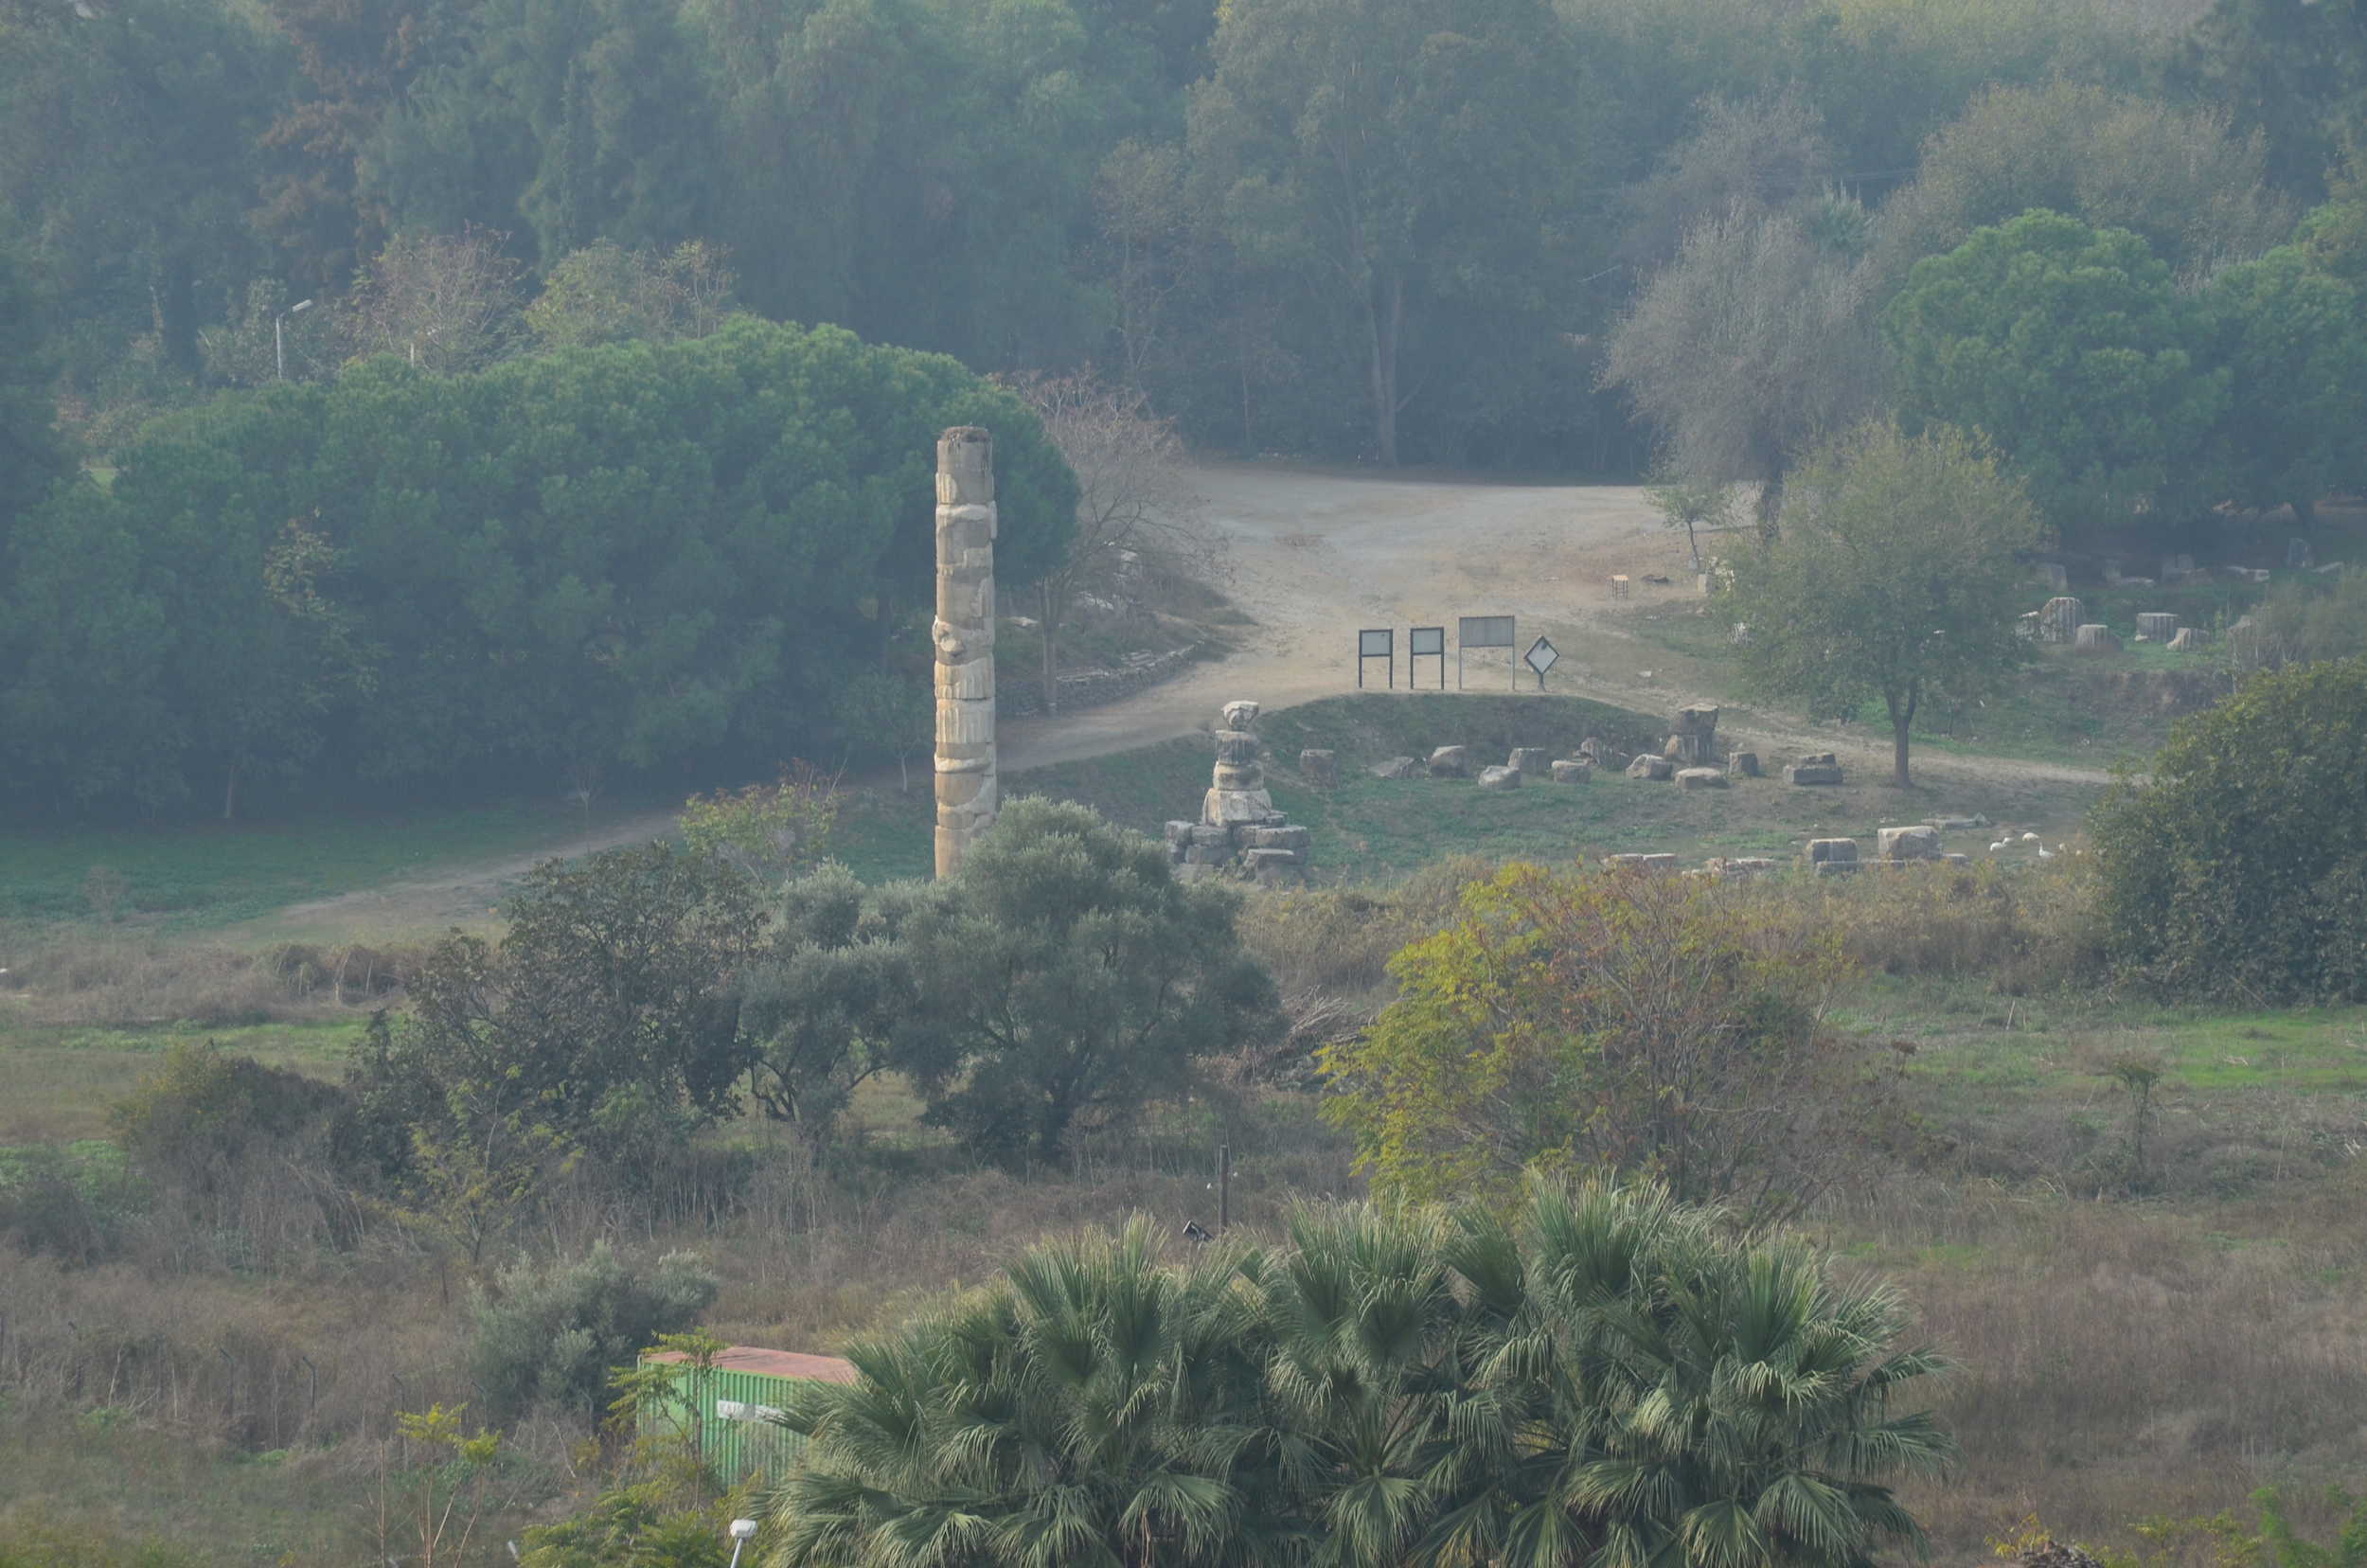 Temple of Artemis from the Basilica of St. John